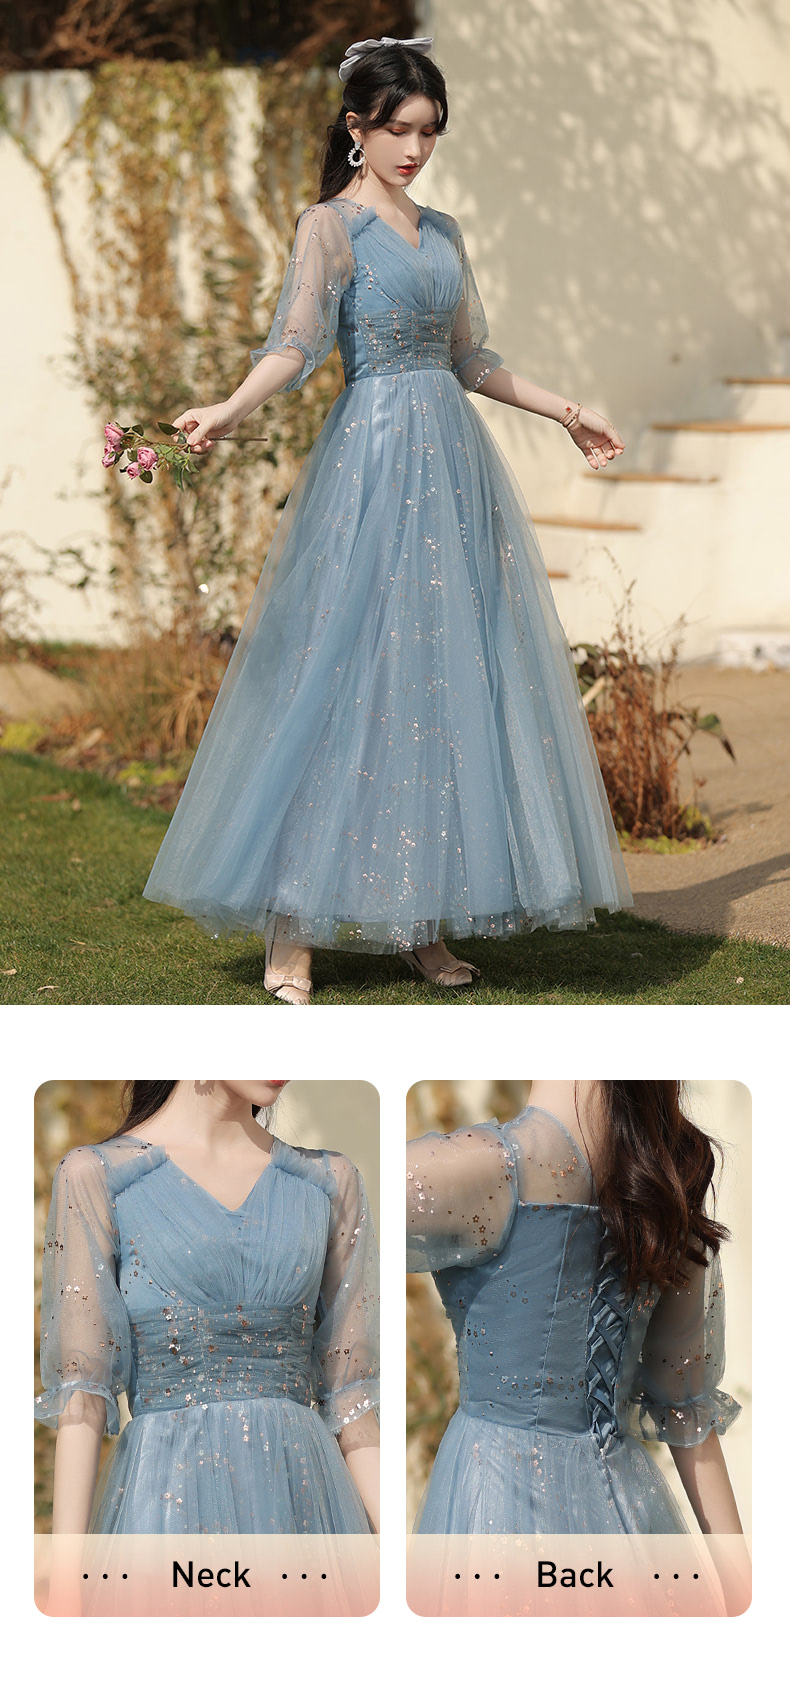 Blue-Bridesmaid-Dress-Wedding-Female-Guest-Gown-with-4-Styles20.jpg